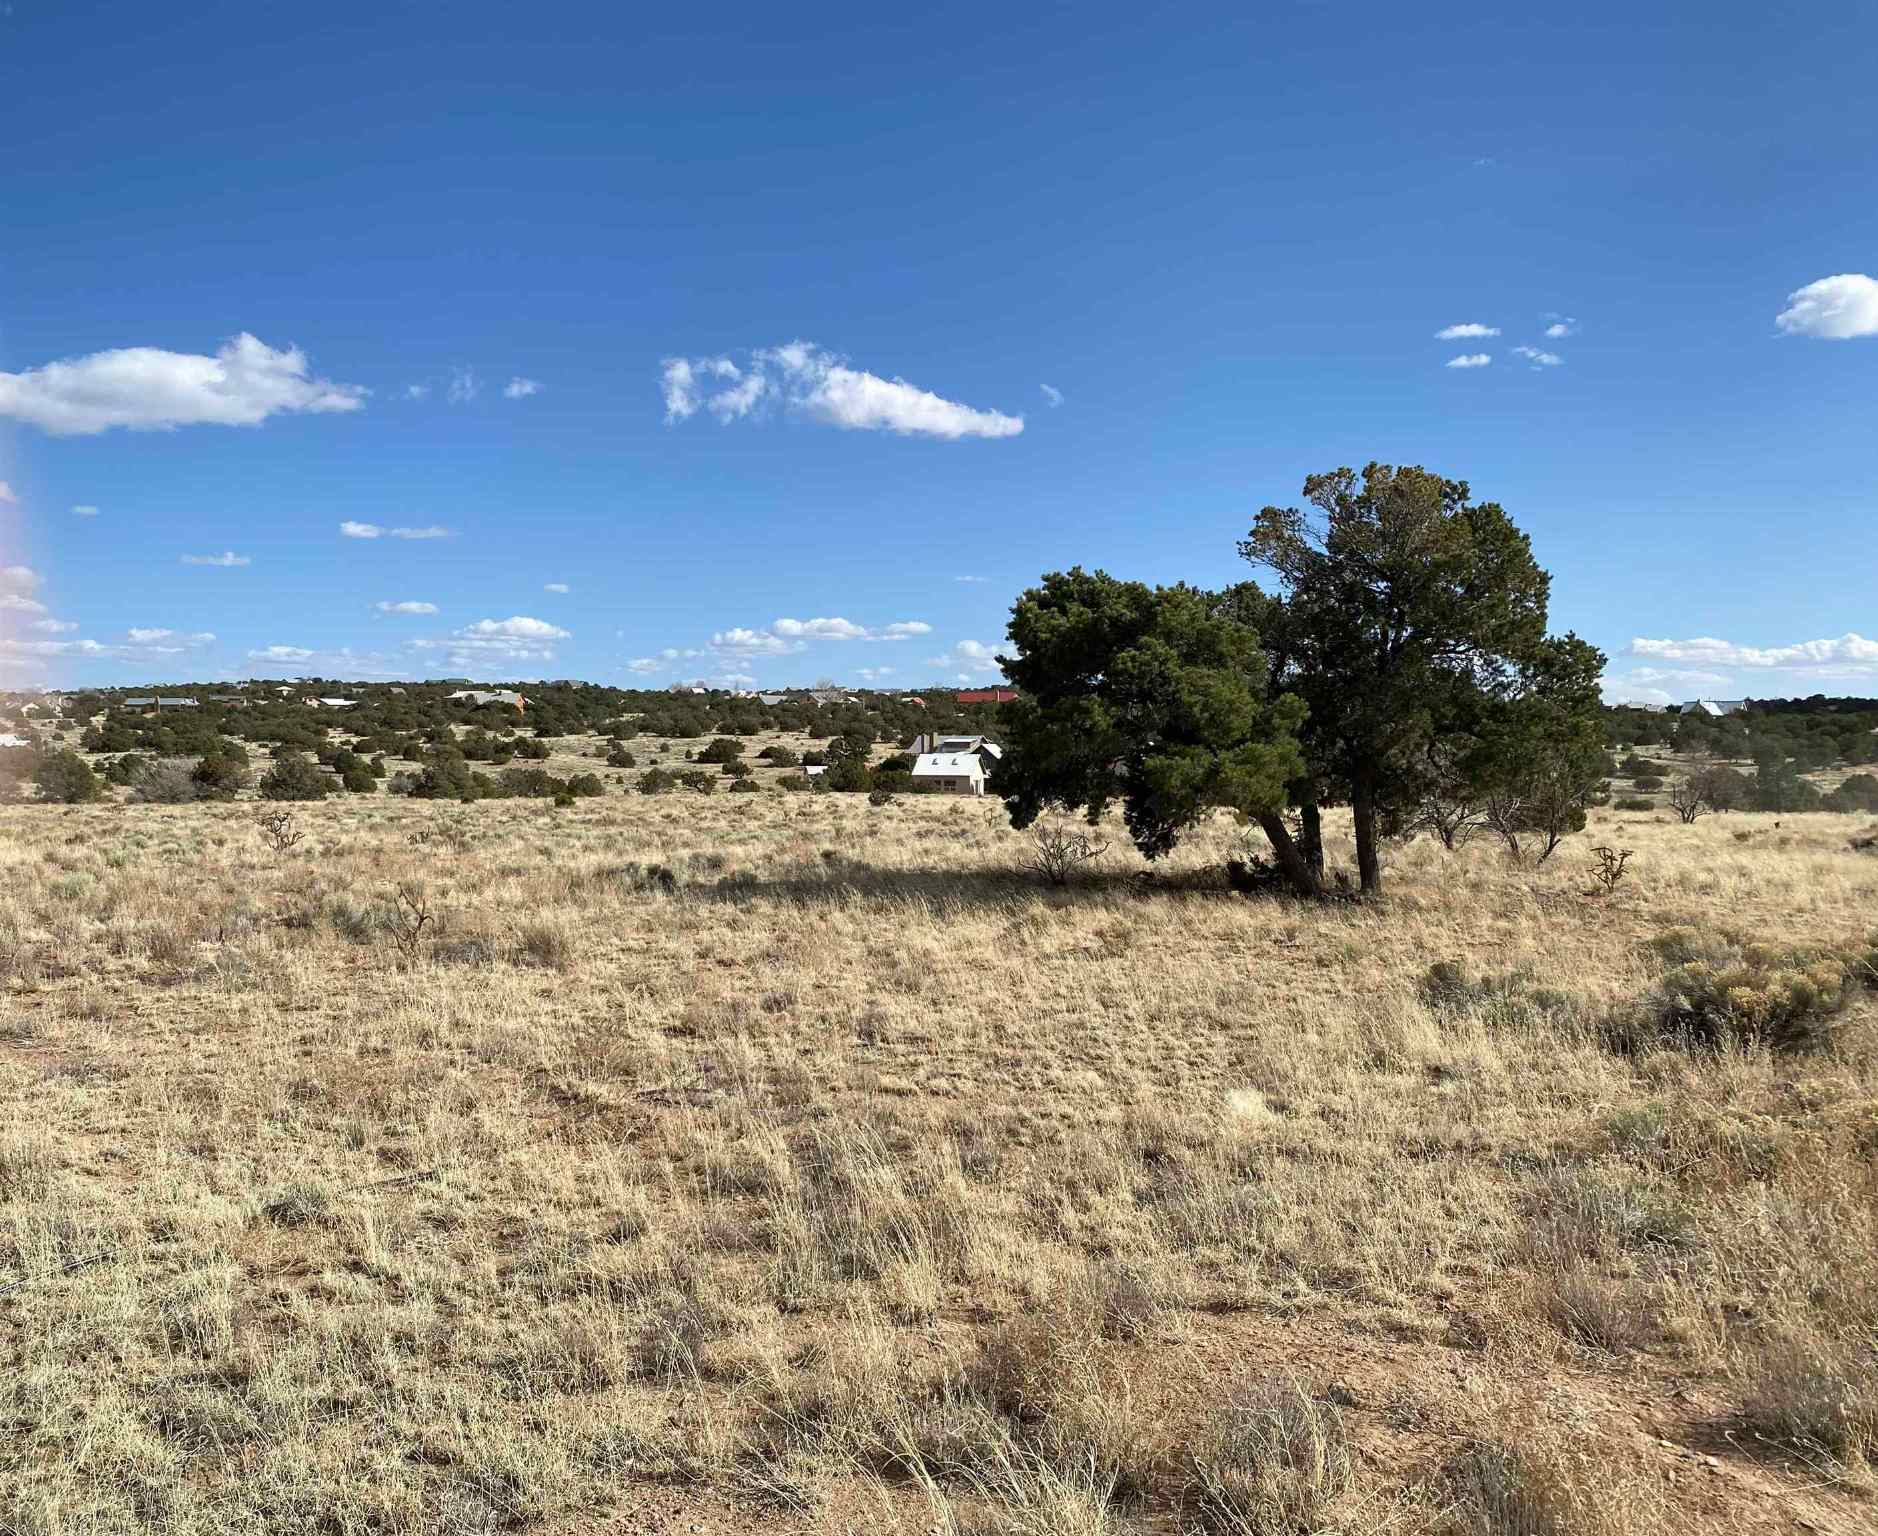 50 OLD, Lamy, New Mexico 87540, ,Land,For Sale,50 OLD,202201135